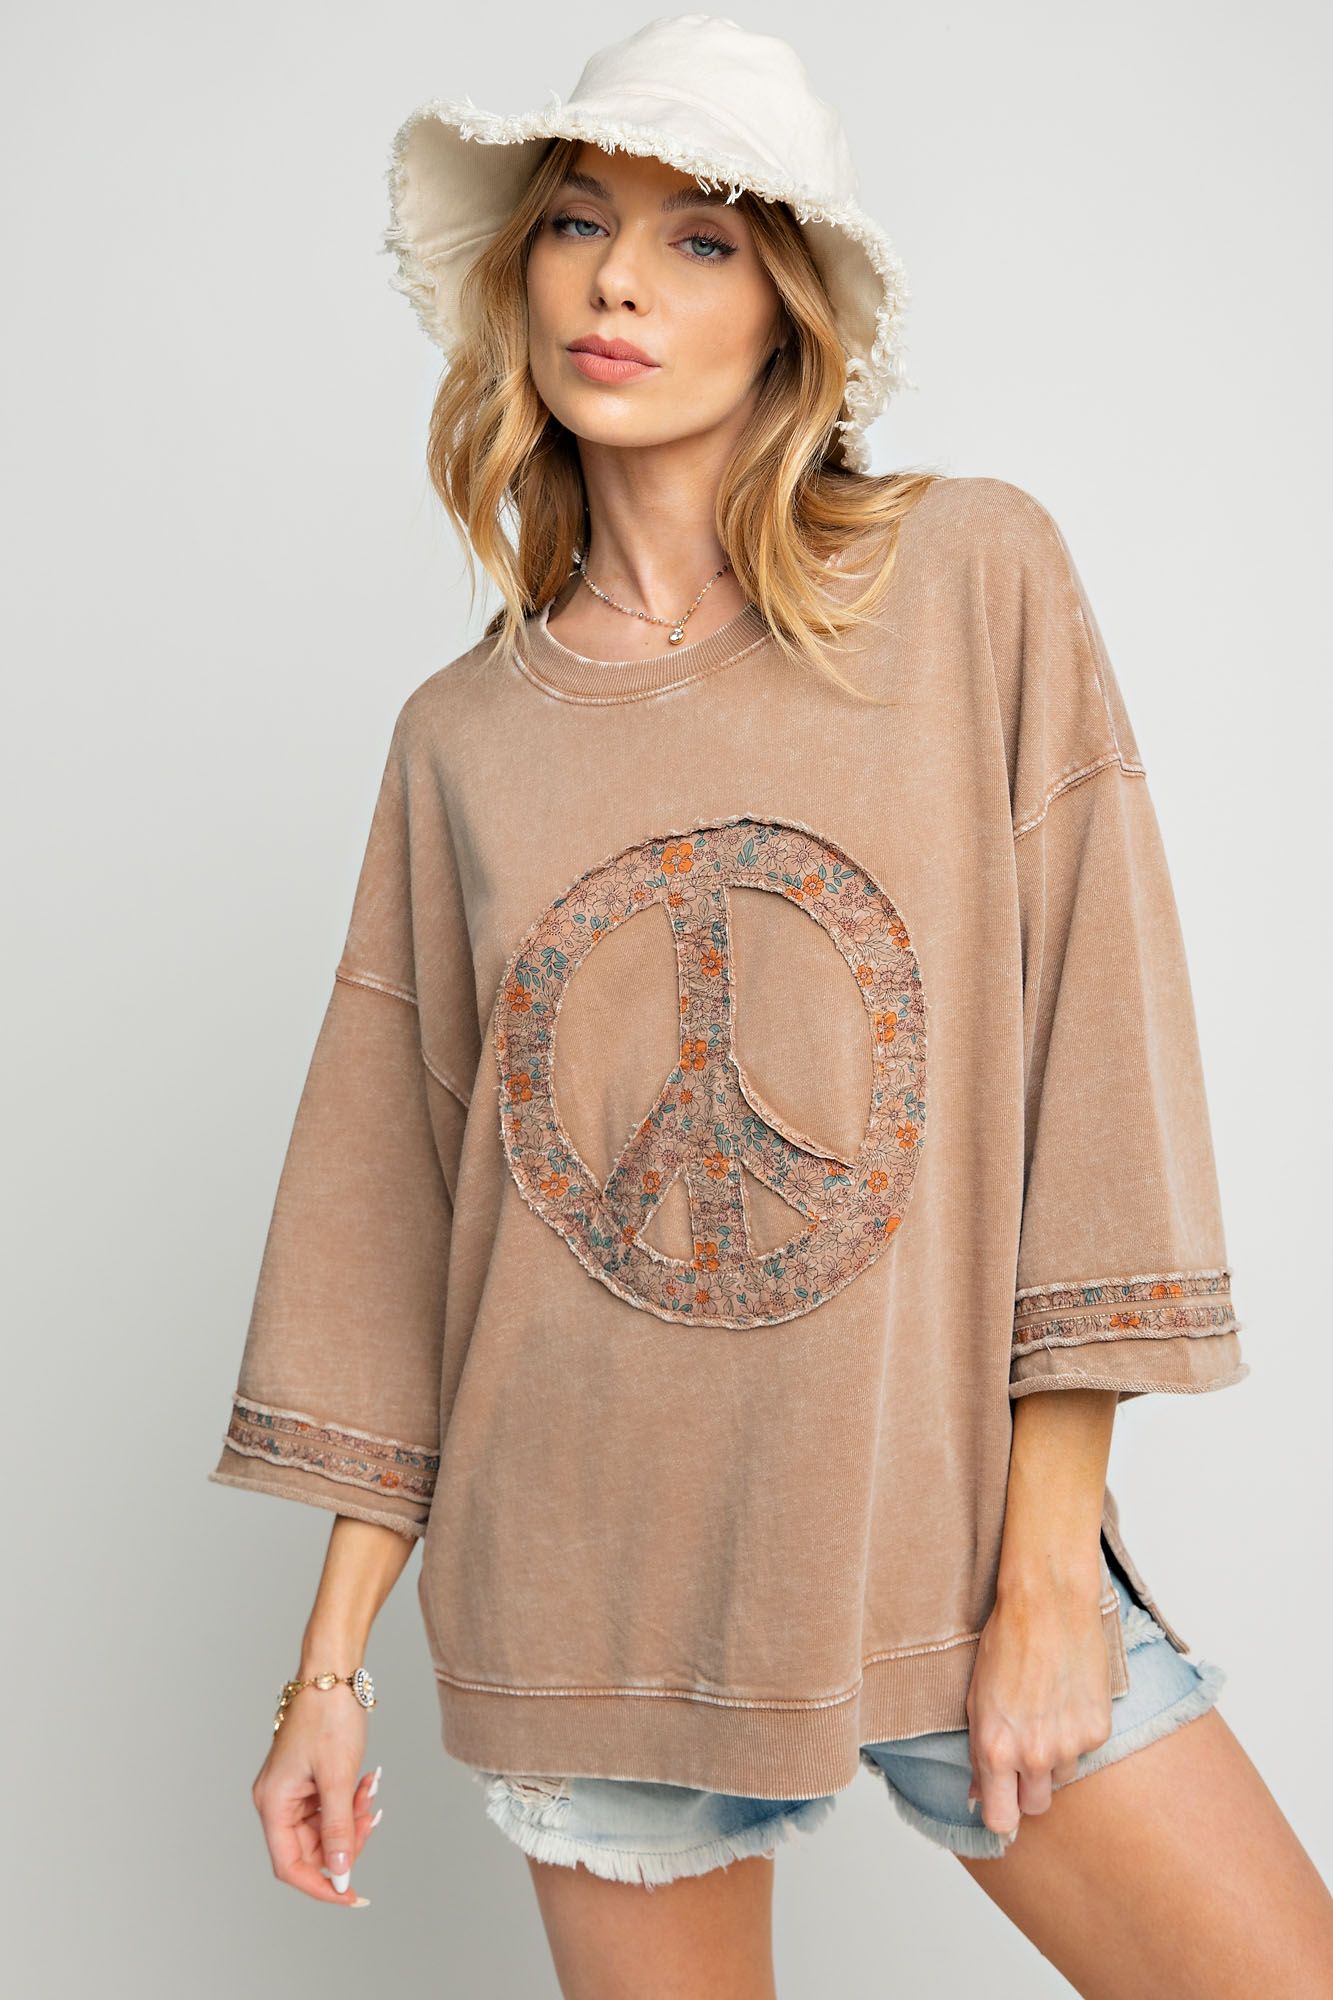 Slub mix ribbed fabric mineral wash top with peace sign symbol RESTOCKED Blouse Easel   